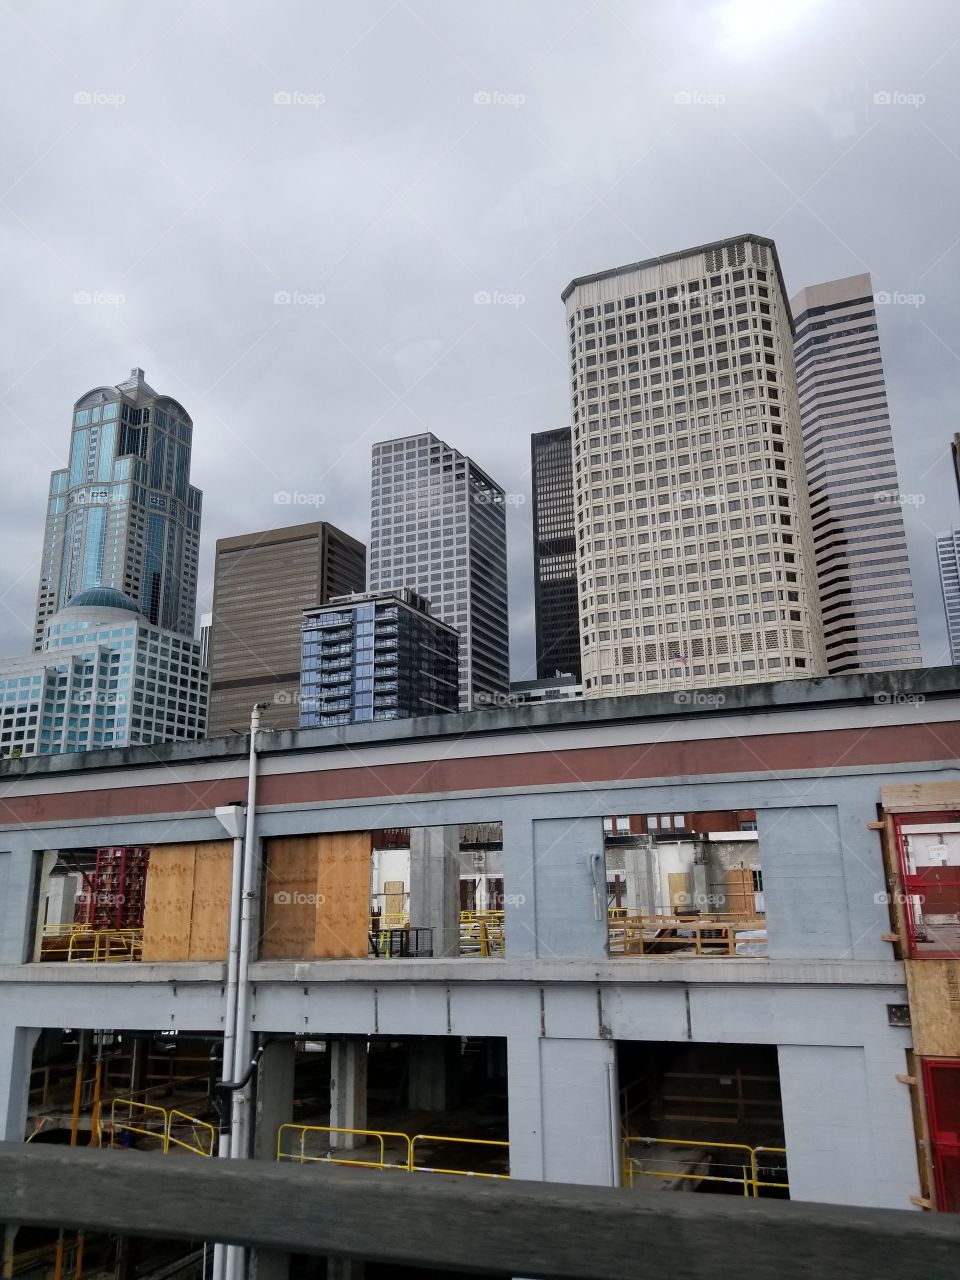 Contrast of finished Skyscrapers with boarded up windows of building in front May 17 2017 Seattle No edits